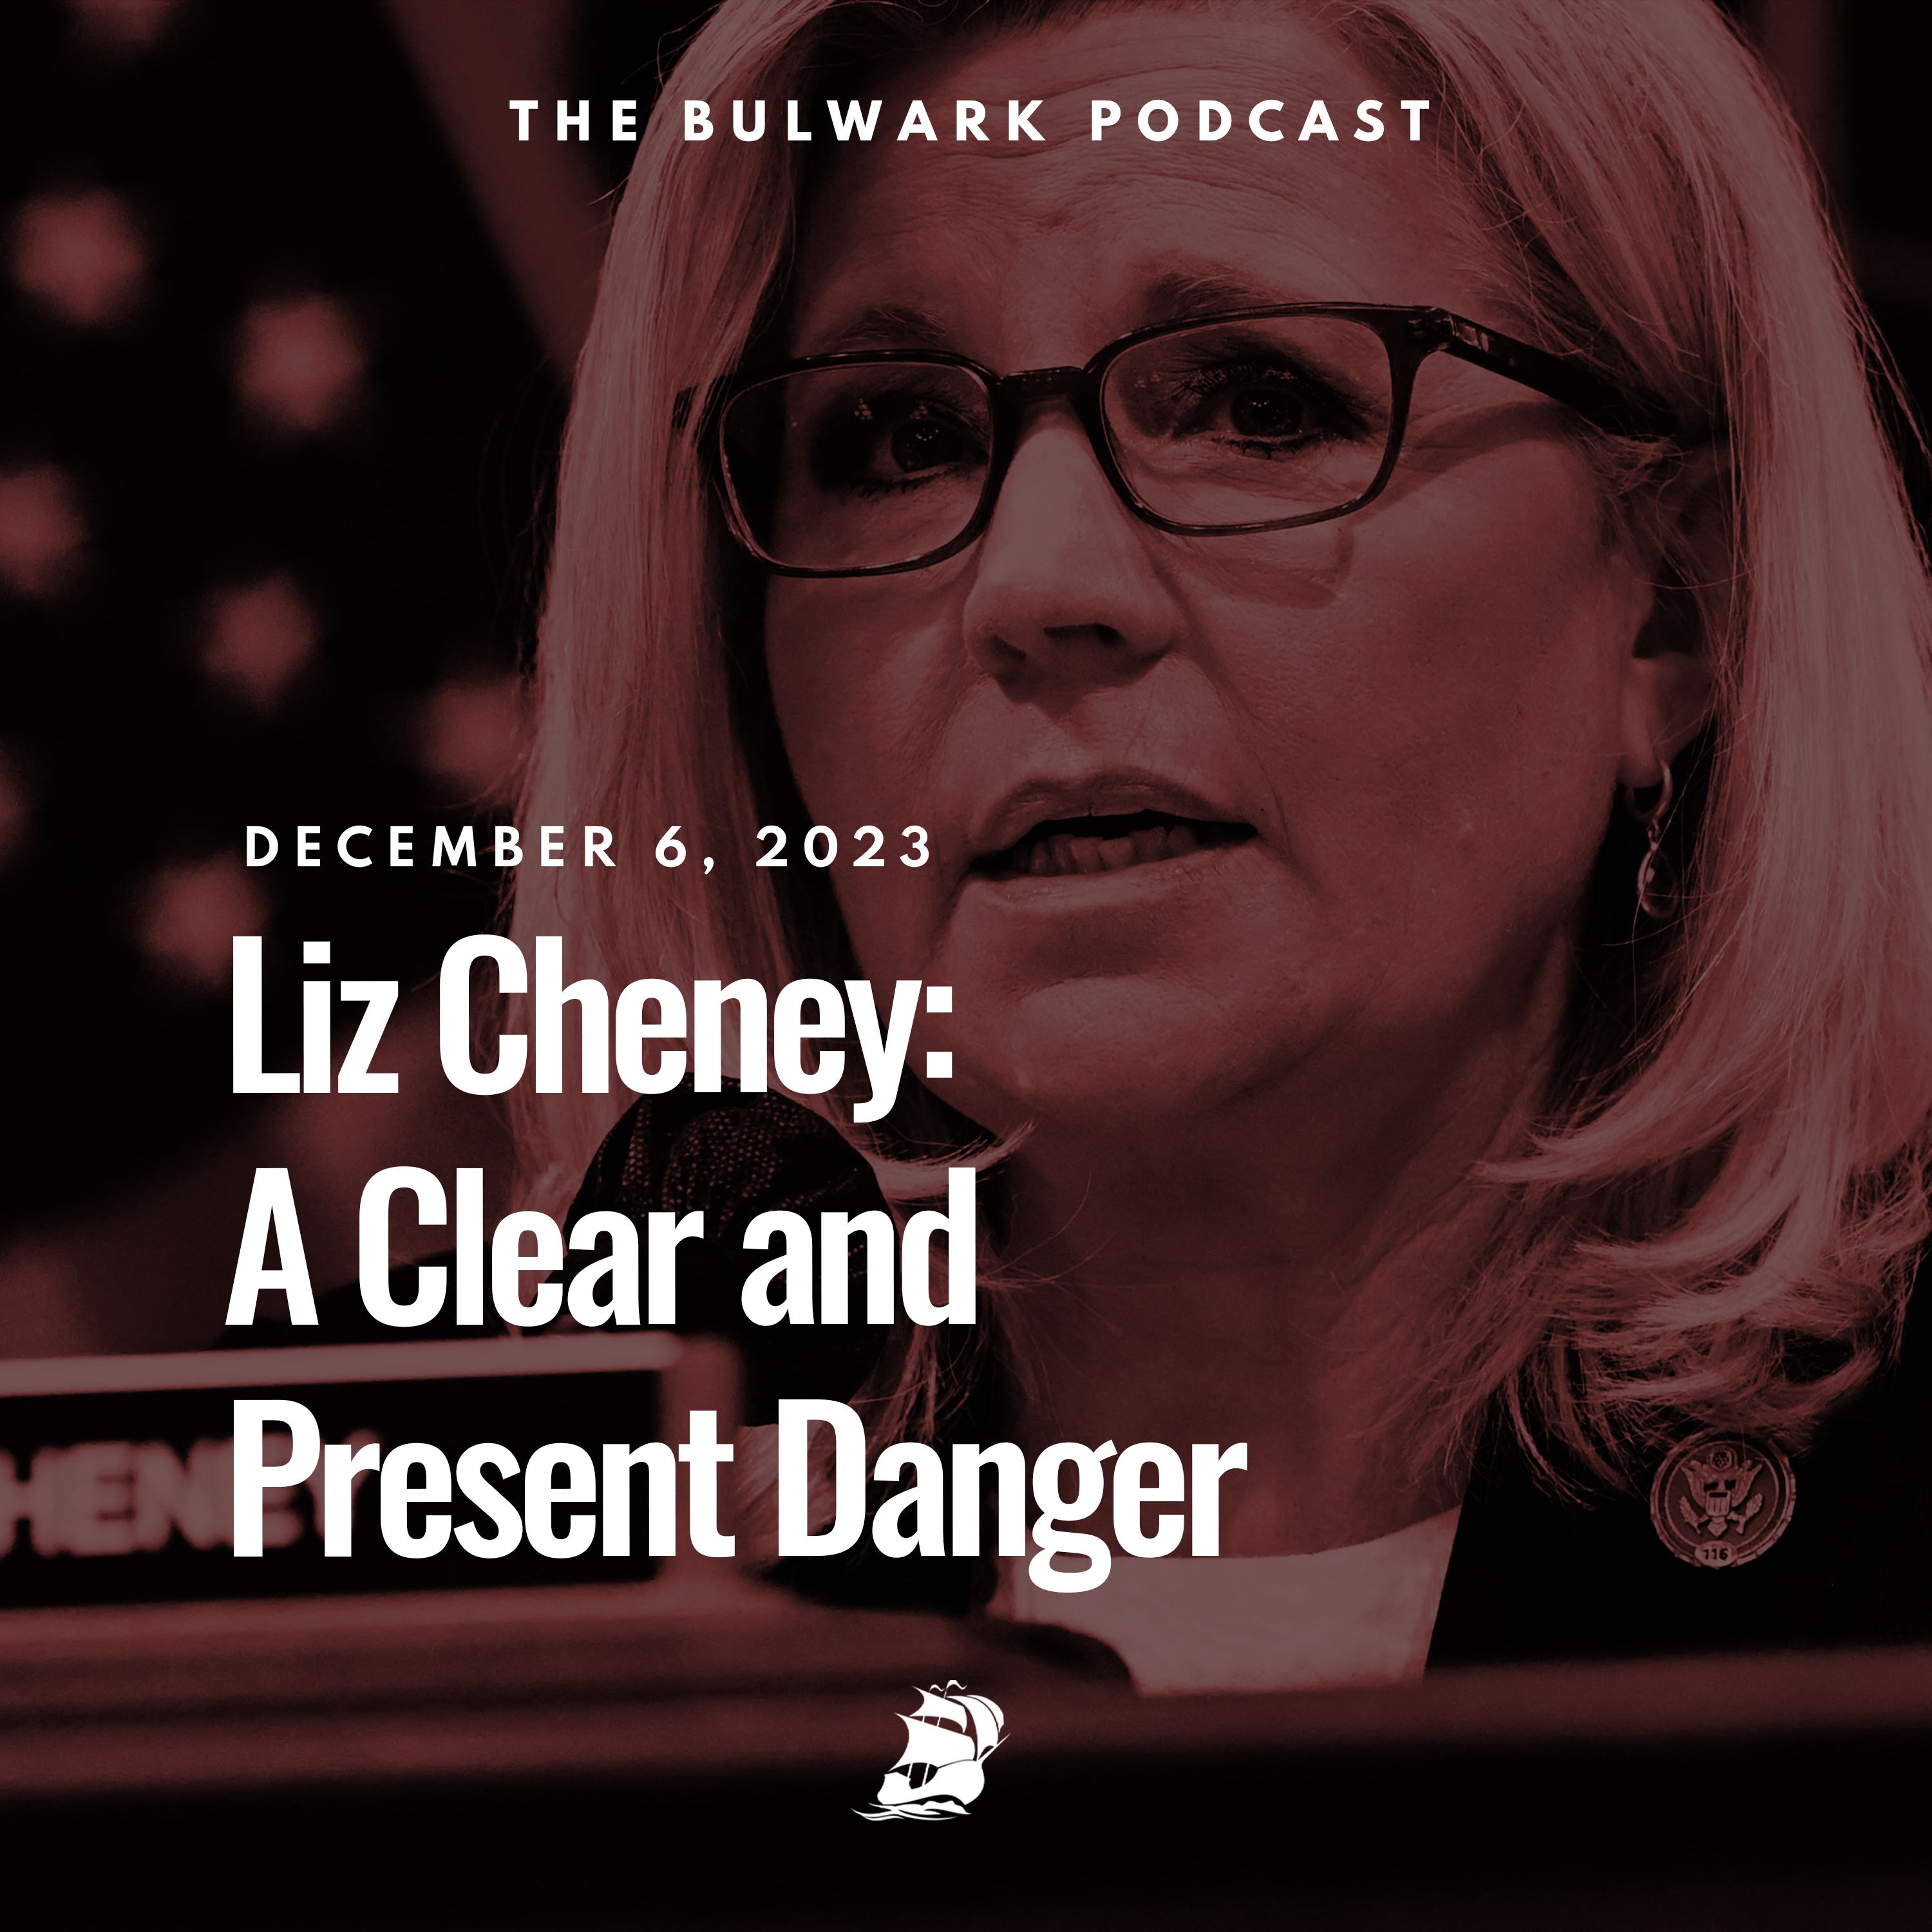 Liz Cheney: A Clear and Present Danger